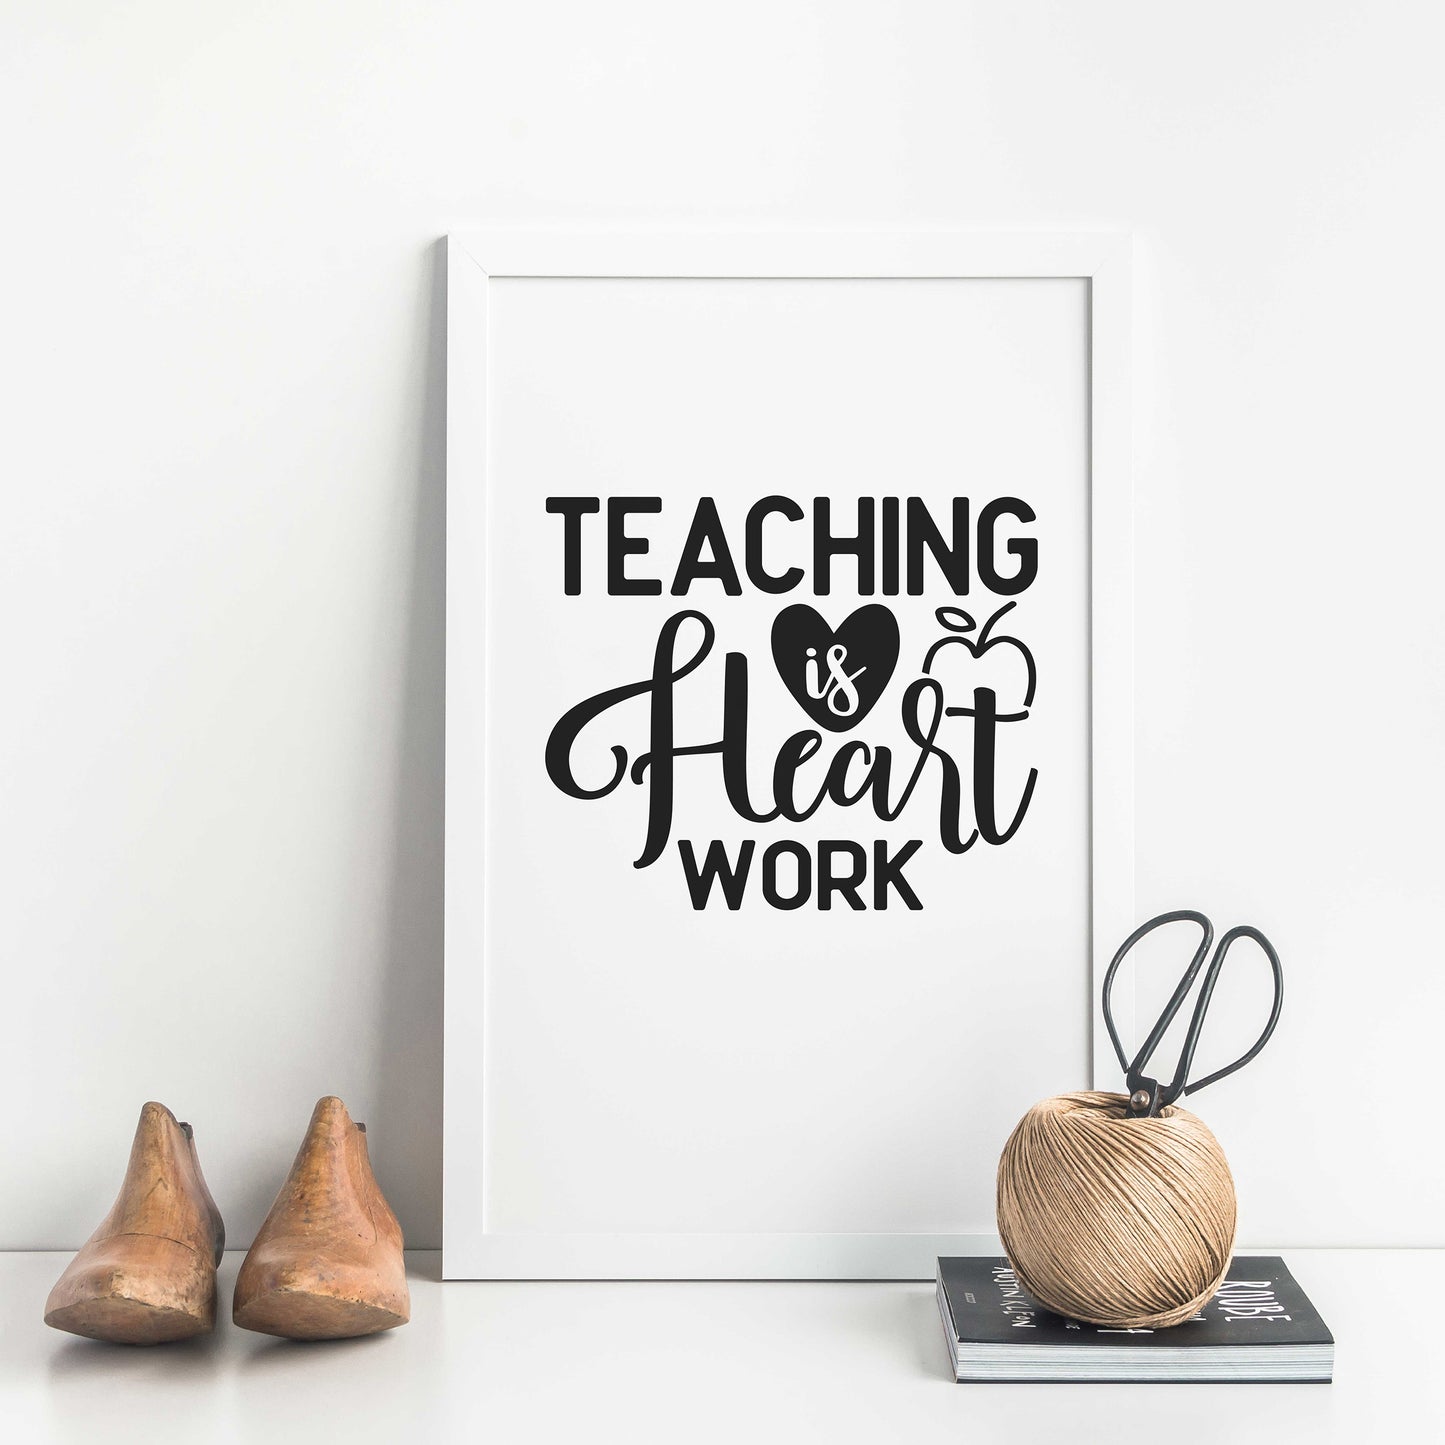 "Teaching is Heart Work" Graphic